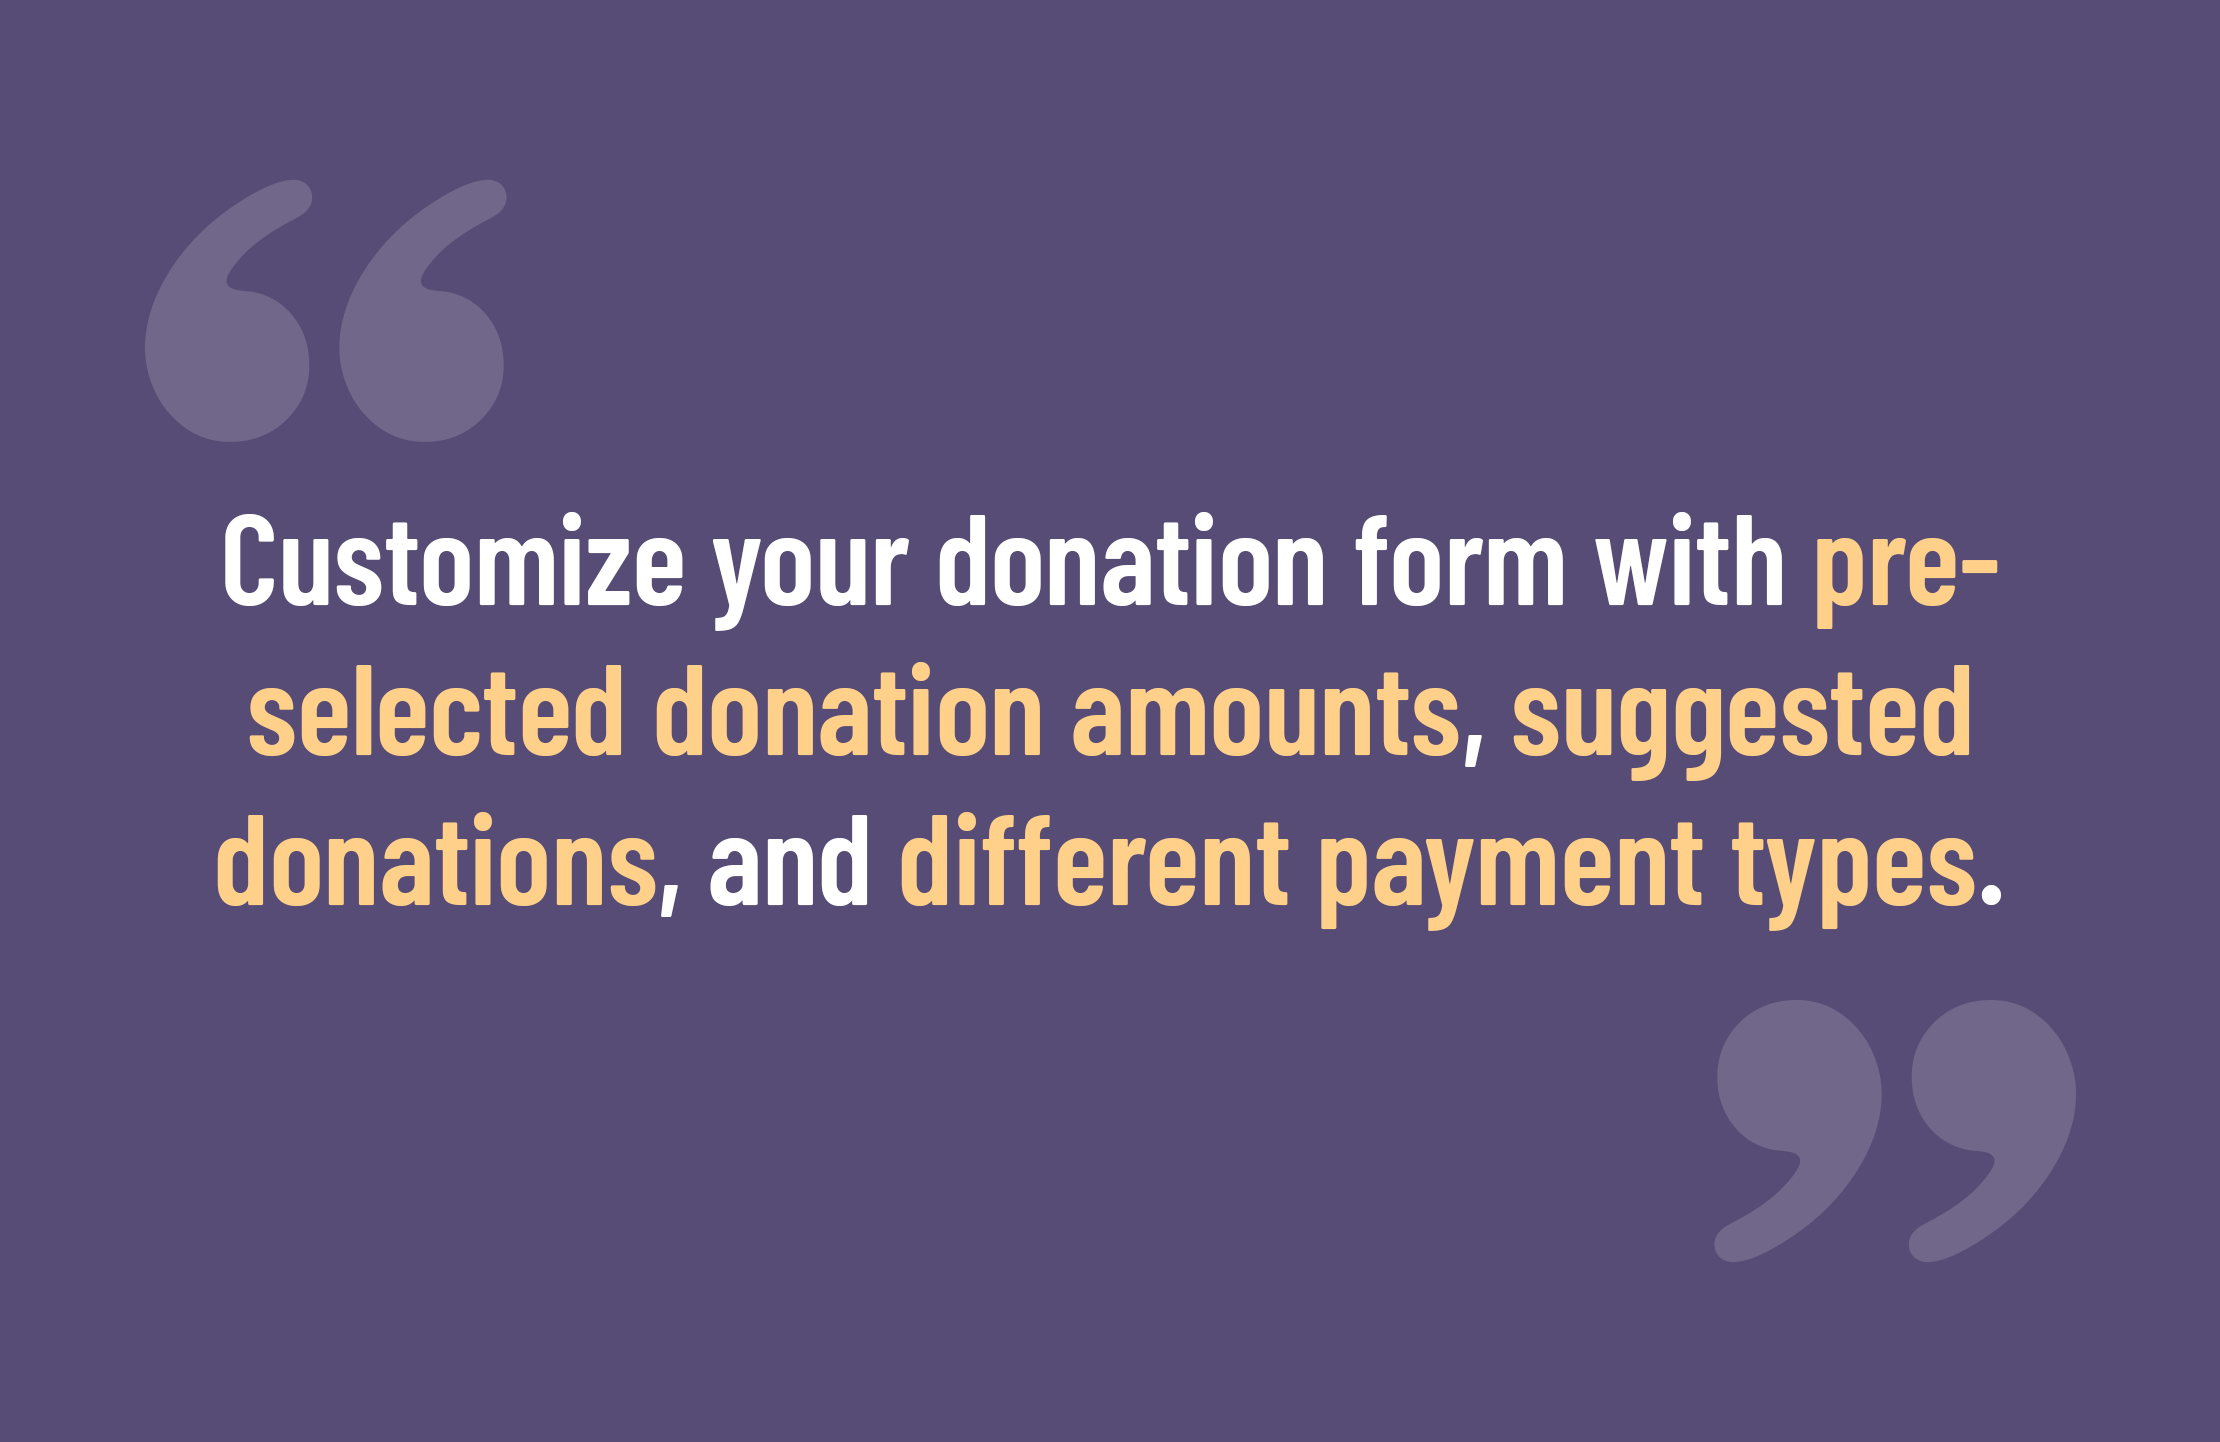 Customize your donation form with pre-selected donation amounts, suggested donations, and different payment types